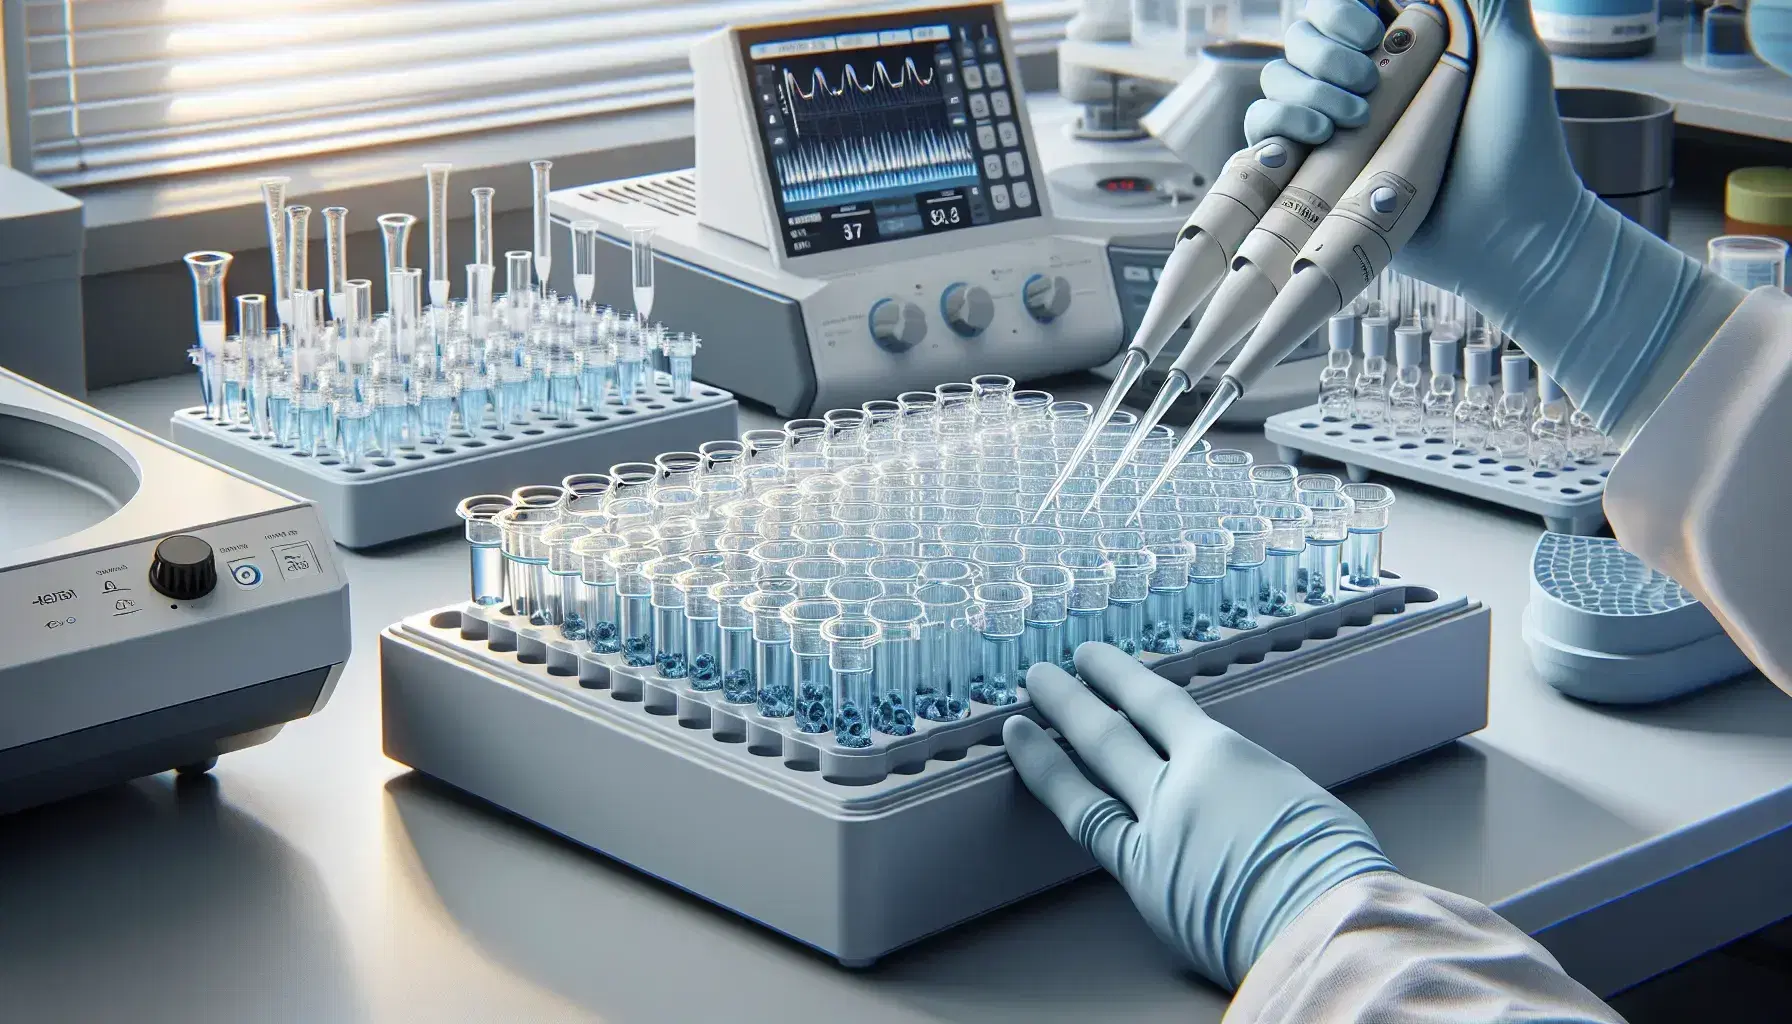 Scientist hands with latex gloves manipulate pipettes over test tubes with blue liquids on light blue rack in blurred modern laboratory.